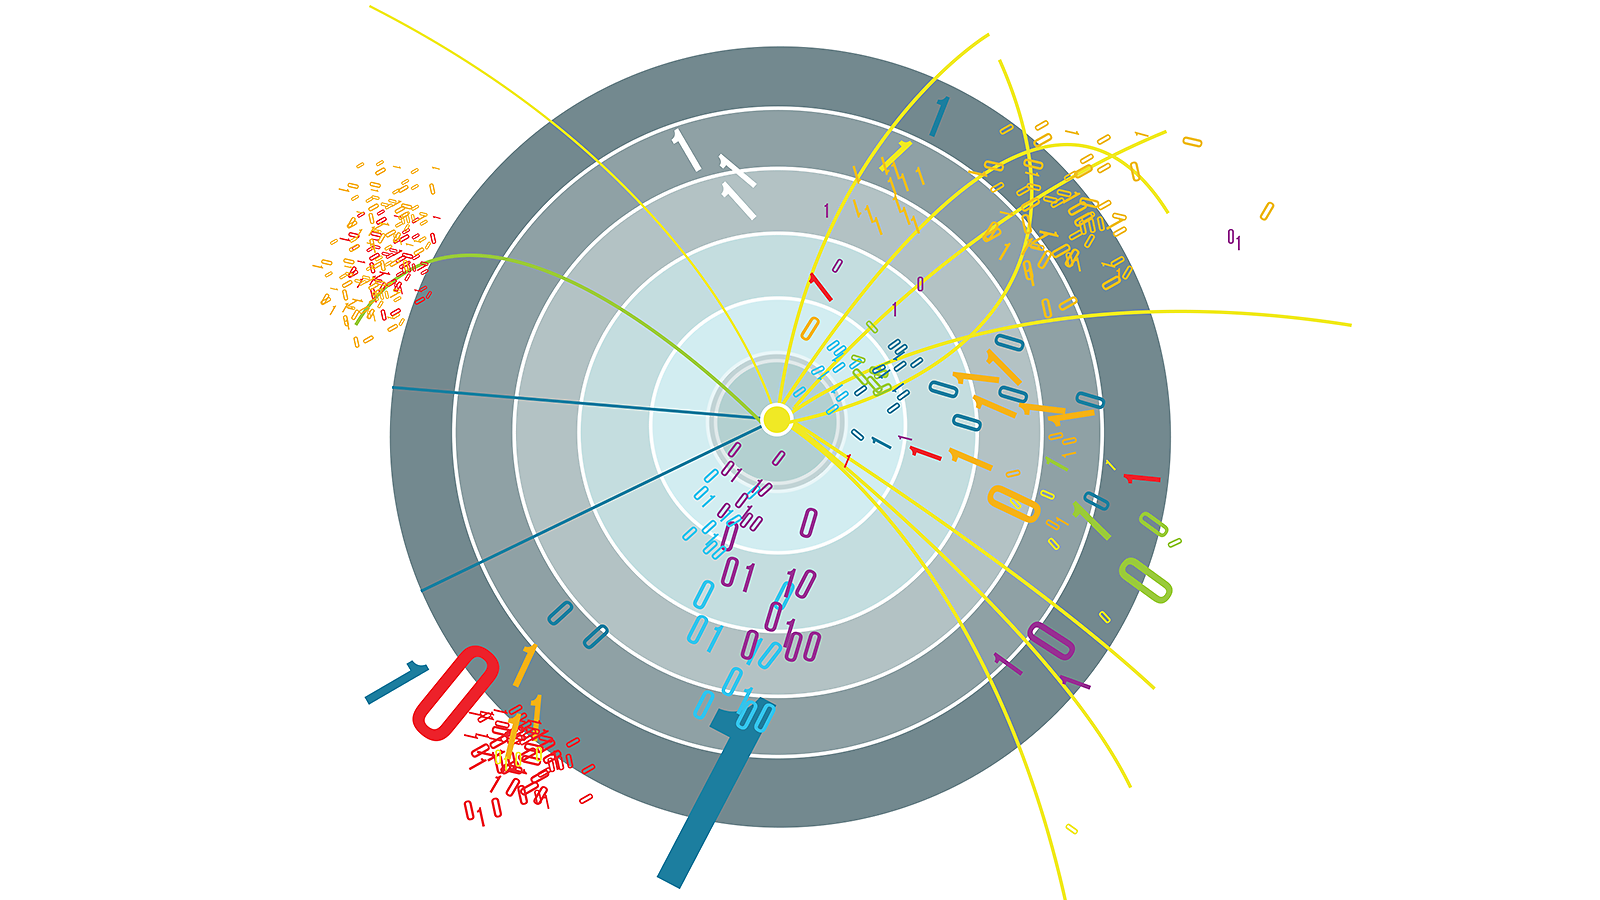 Illustration depicting a particle collision and exploding data